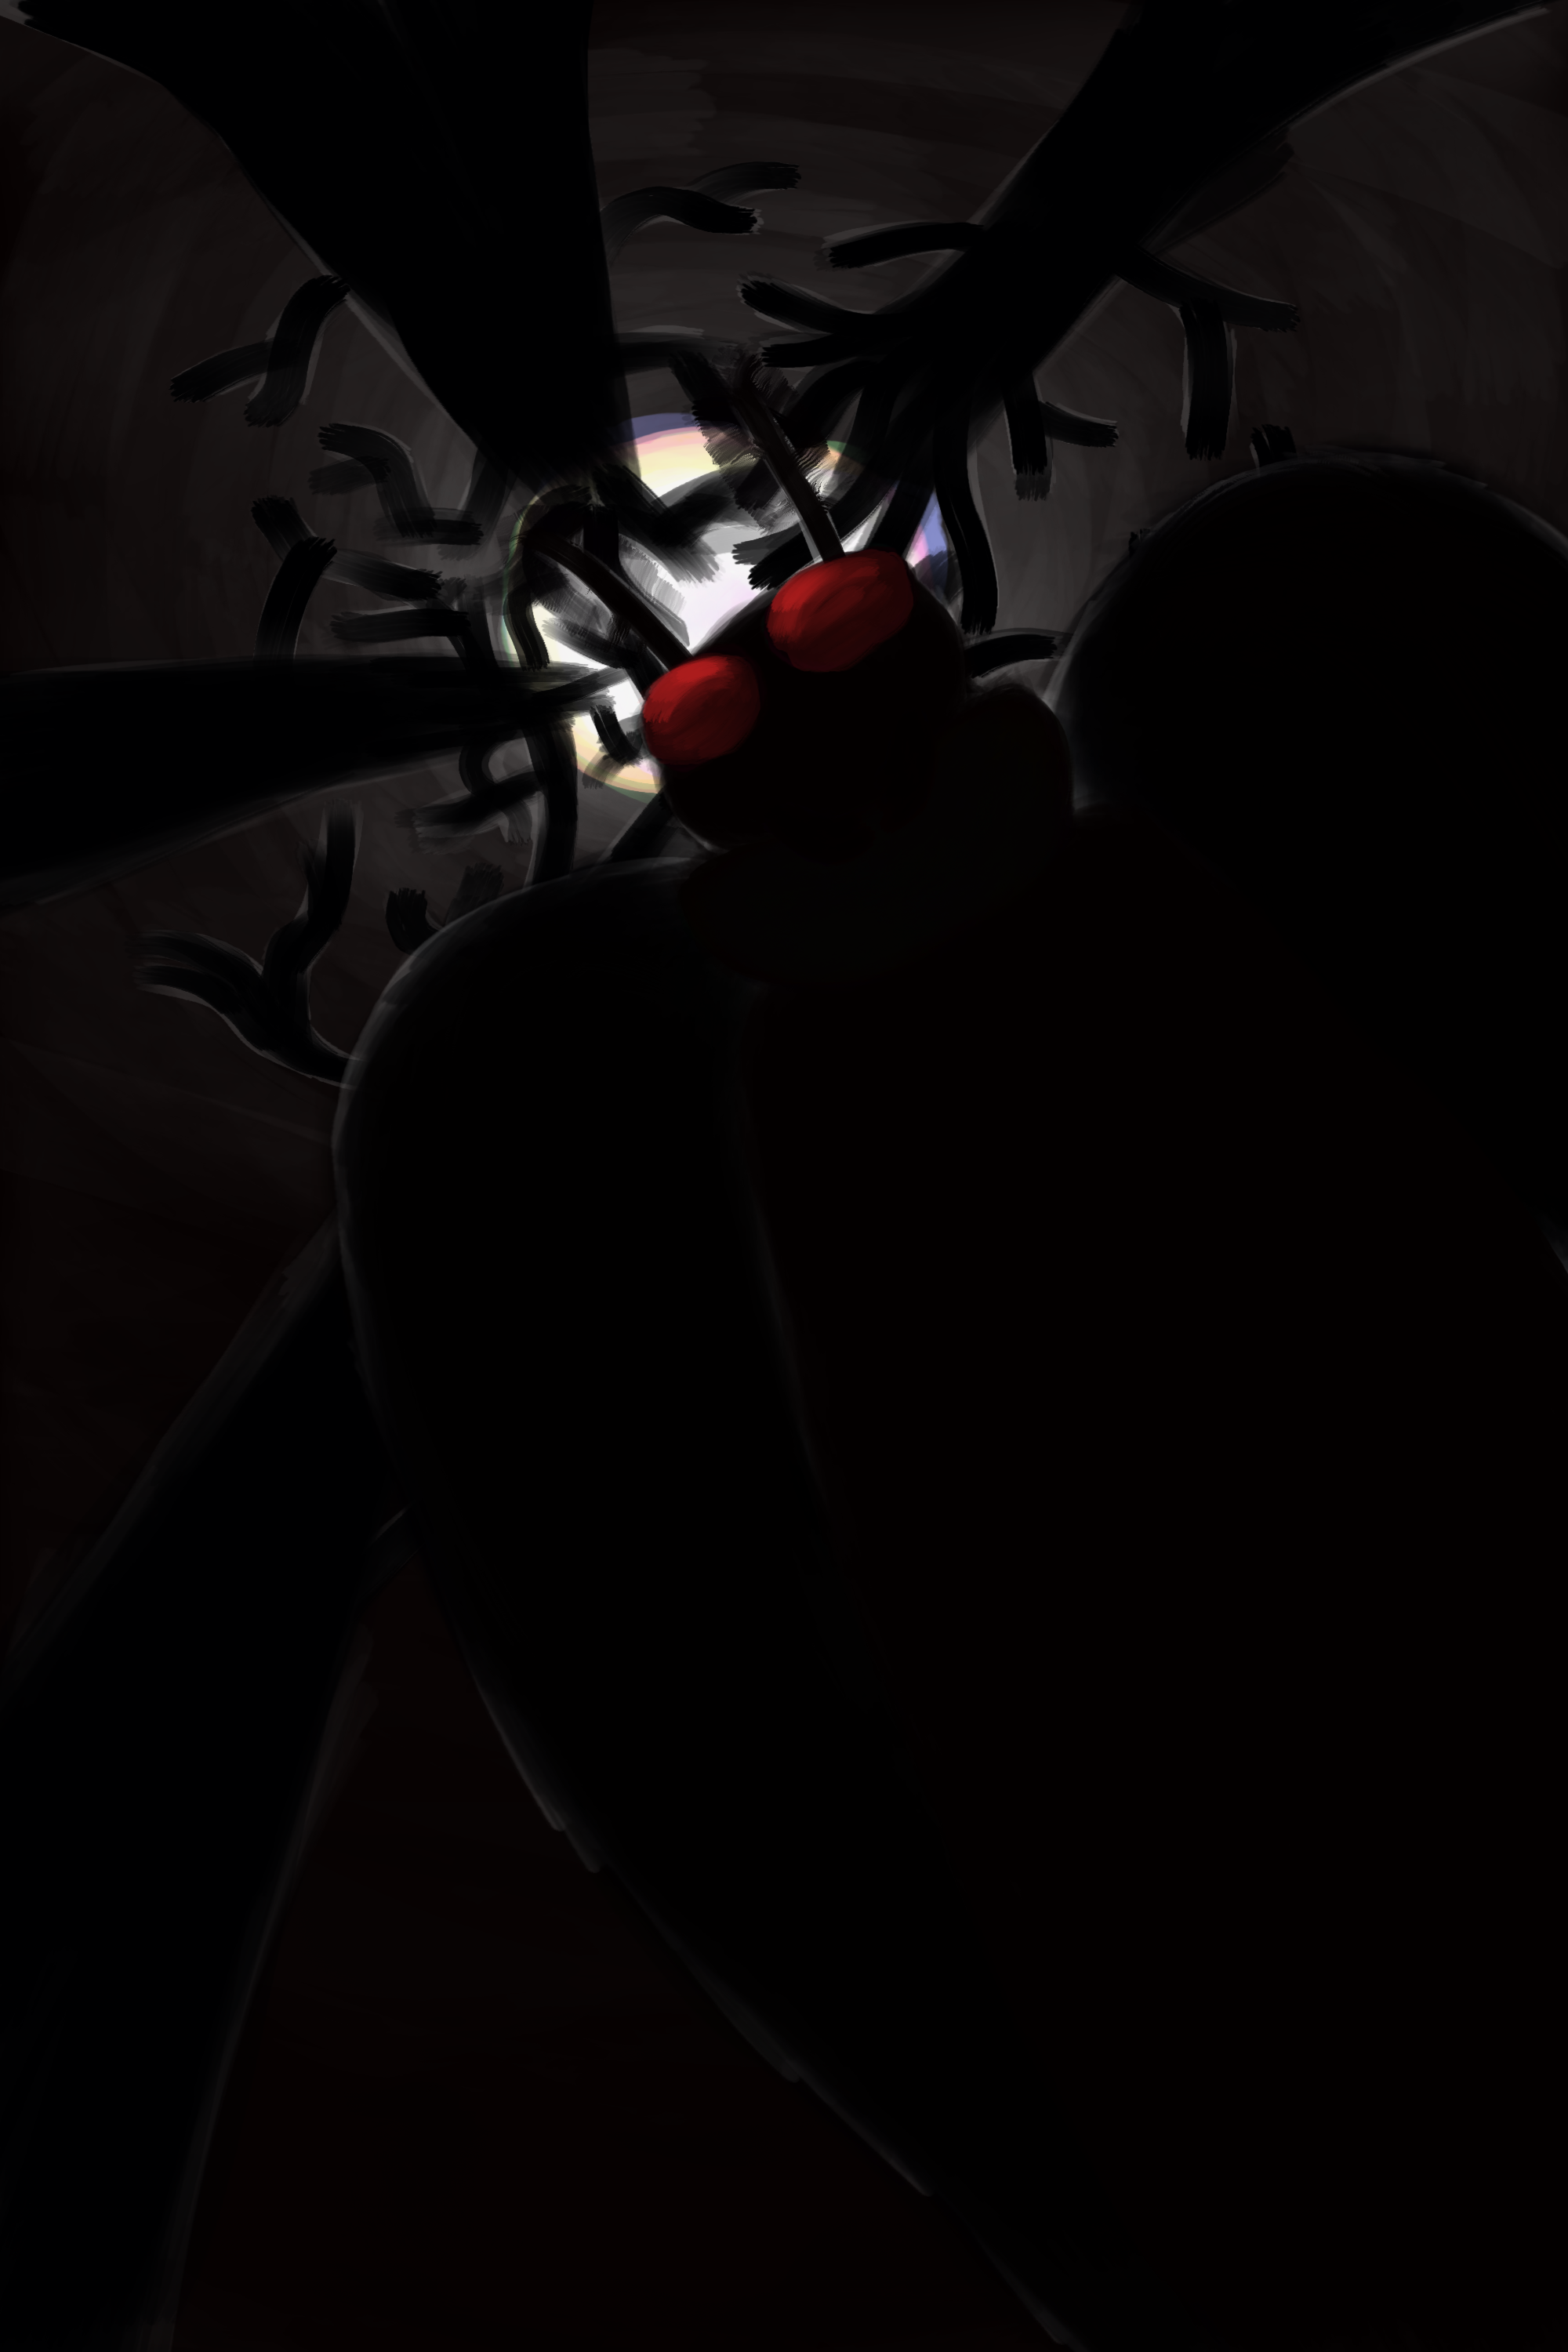 mothman fanart, i really liked drawing this perspective and lighting